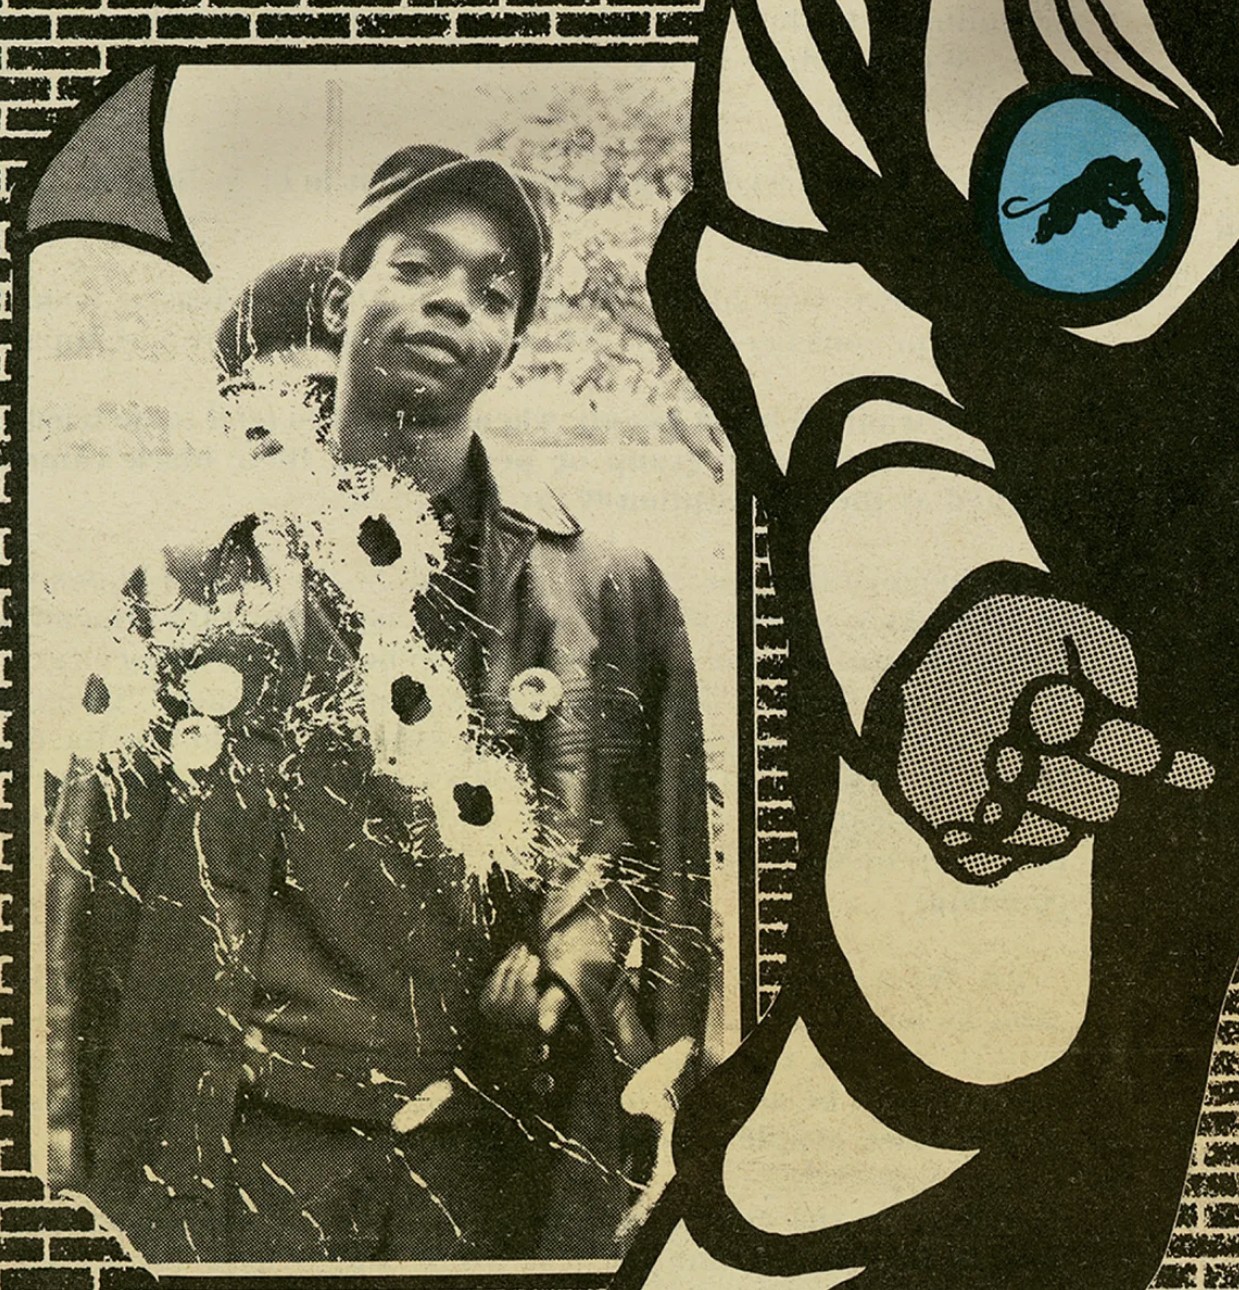 Detail of Emory Douglas’s back cover for The Black Panther, April 3, 1971. Bobby Hutton. © Emory Douglas/Artists Rights Society (ARS), New York.